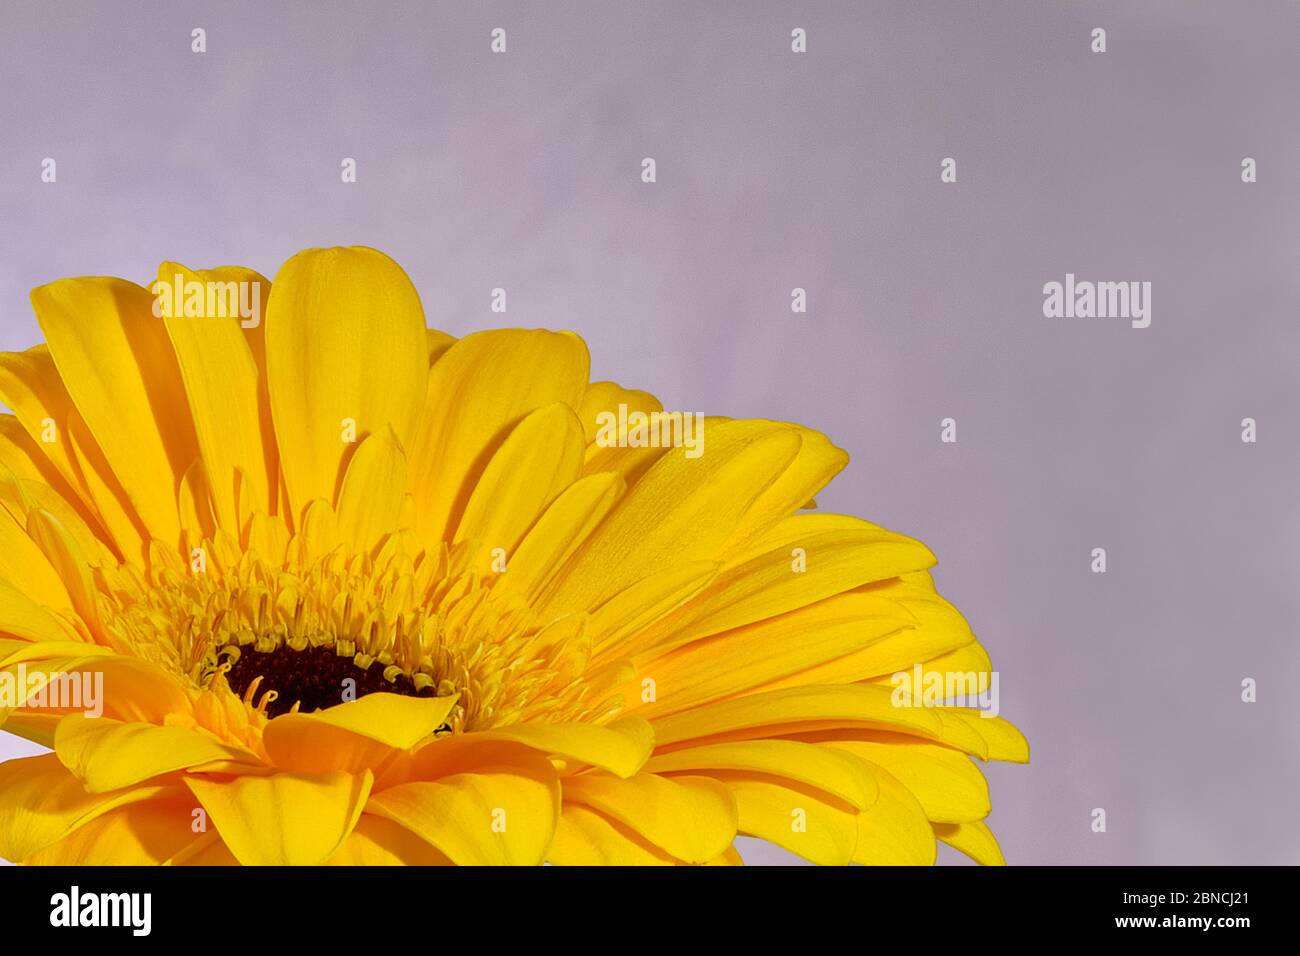 A close up of a Daisy with yellow petals in one side of the frame isolated against a clear grey background Stock Photo